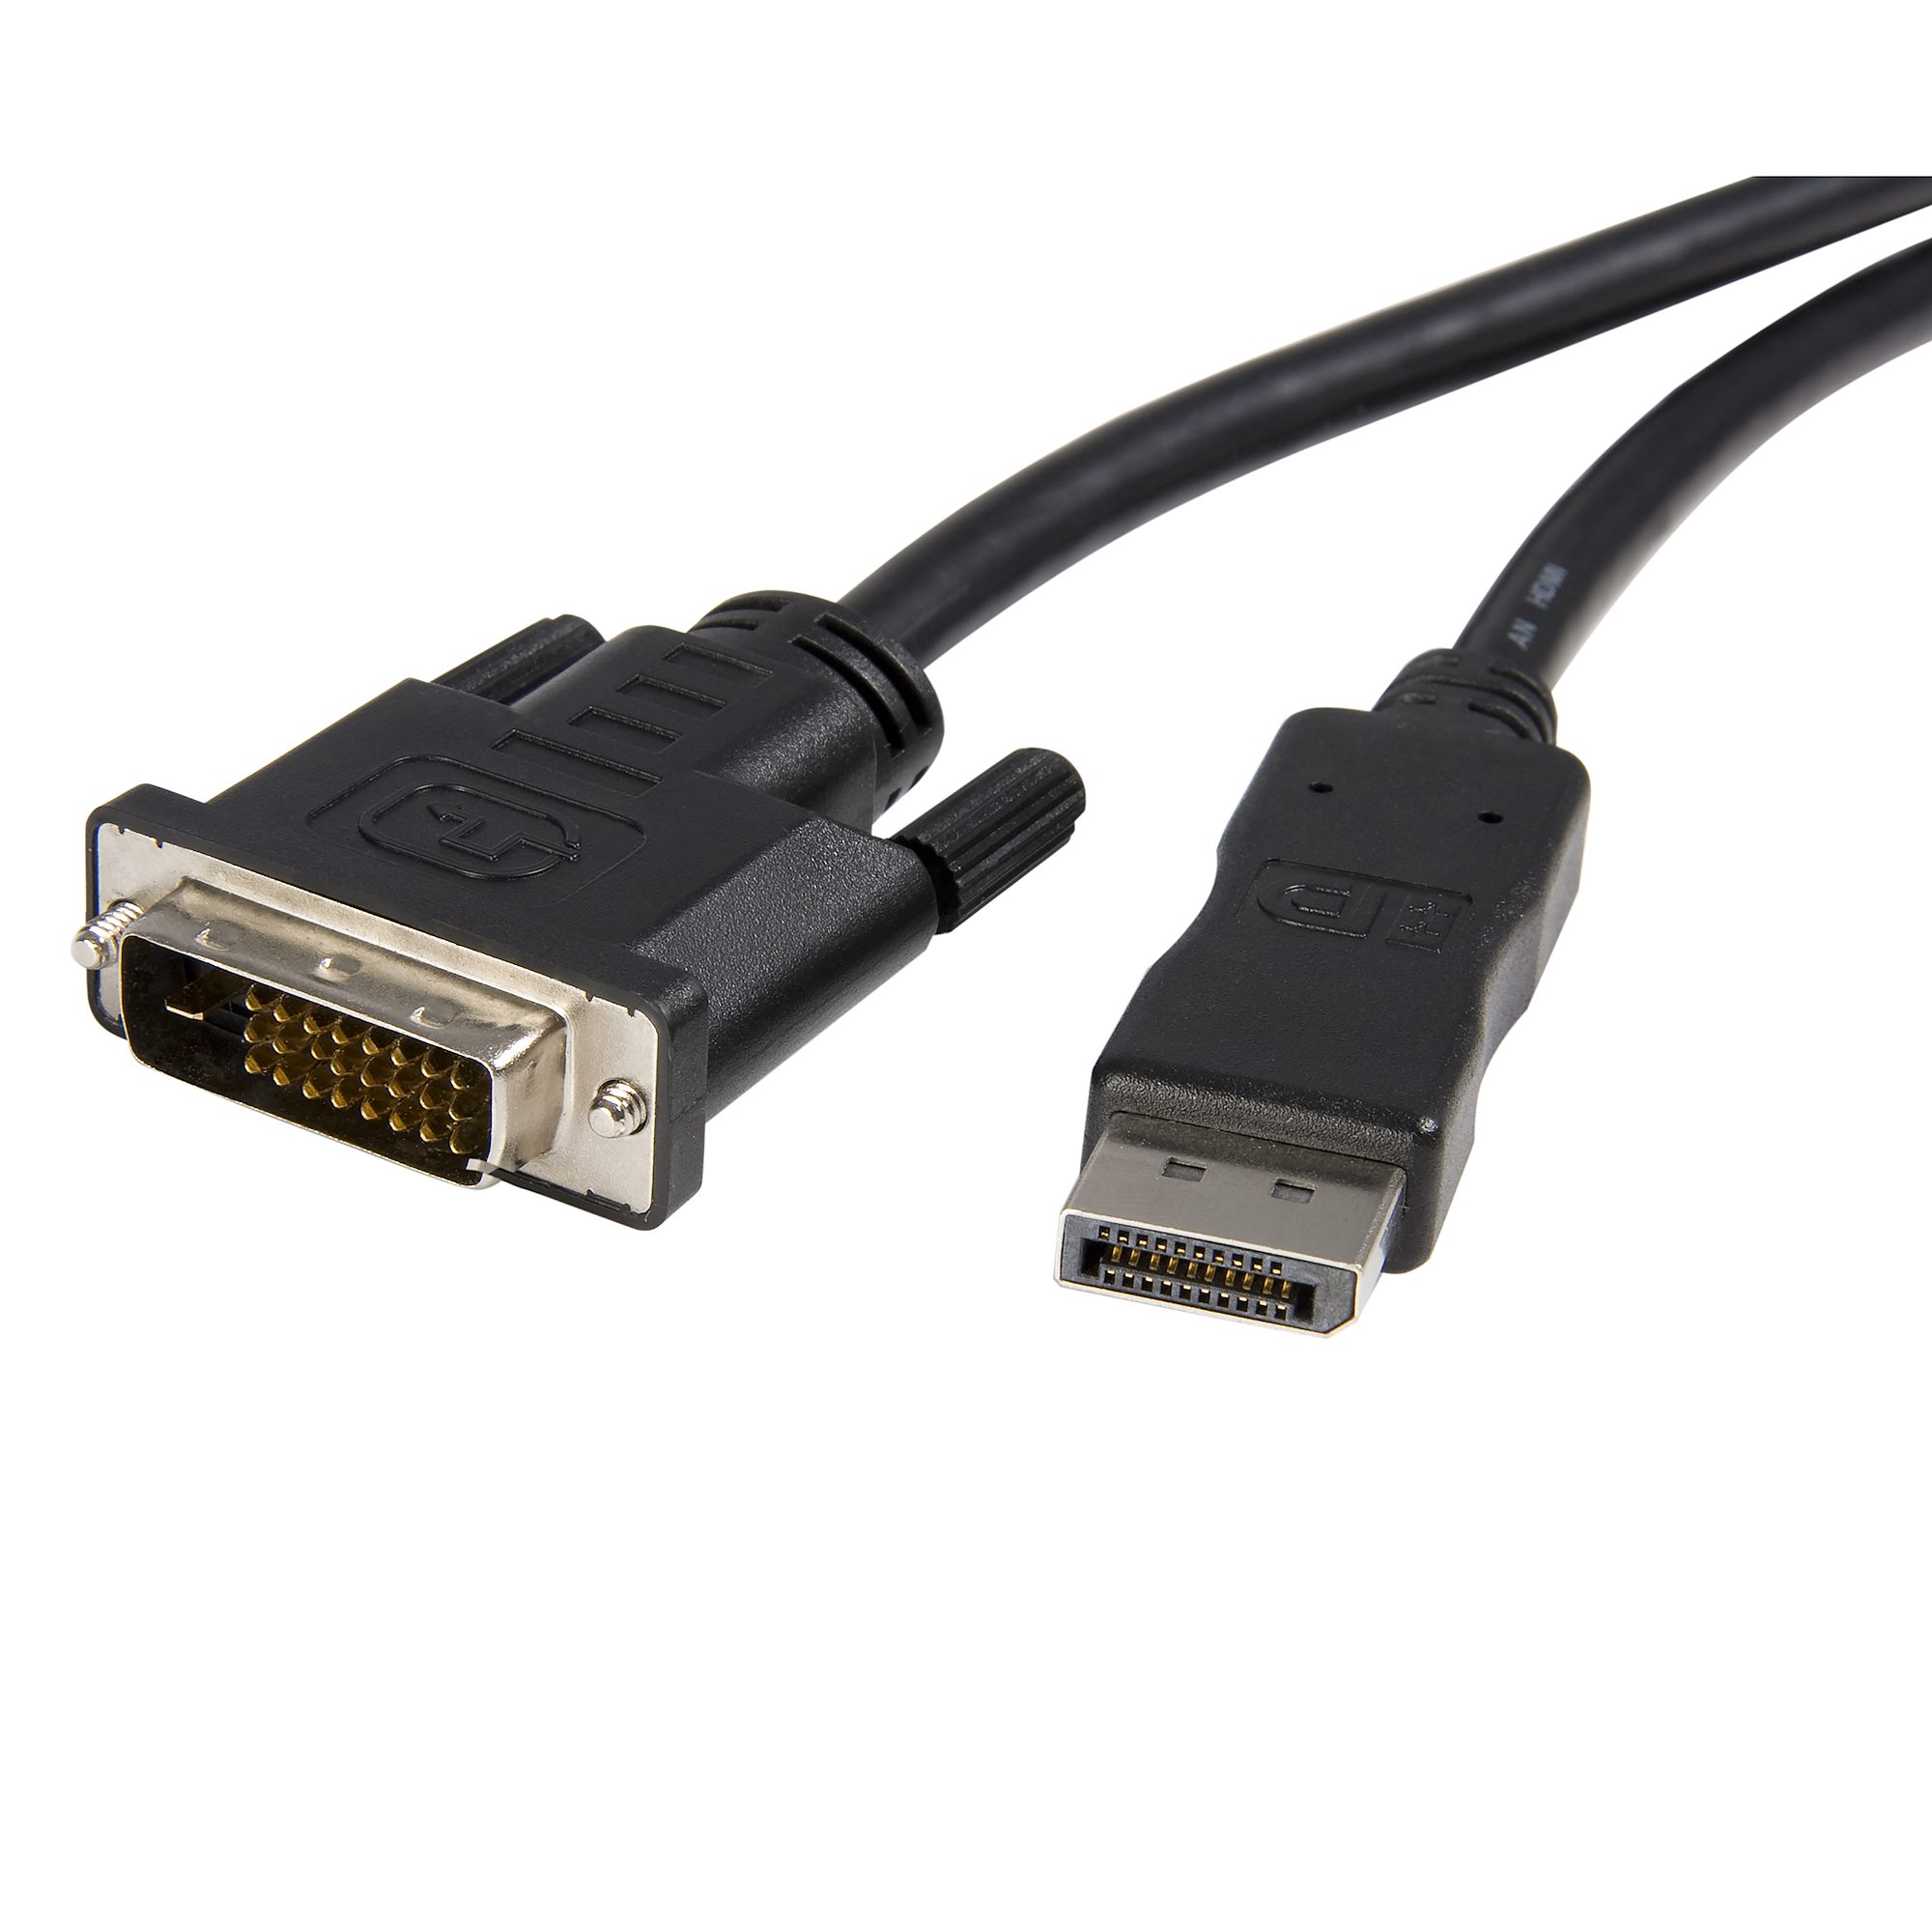 DVI Cord Computer Monitor Cable 1920x1200 ,Black 10 ft StarTech.com DVI Extension Cable Male to Female Cable Single Link DVIDSMF10 DVI-D Cable 